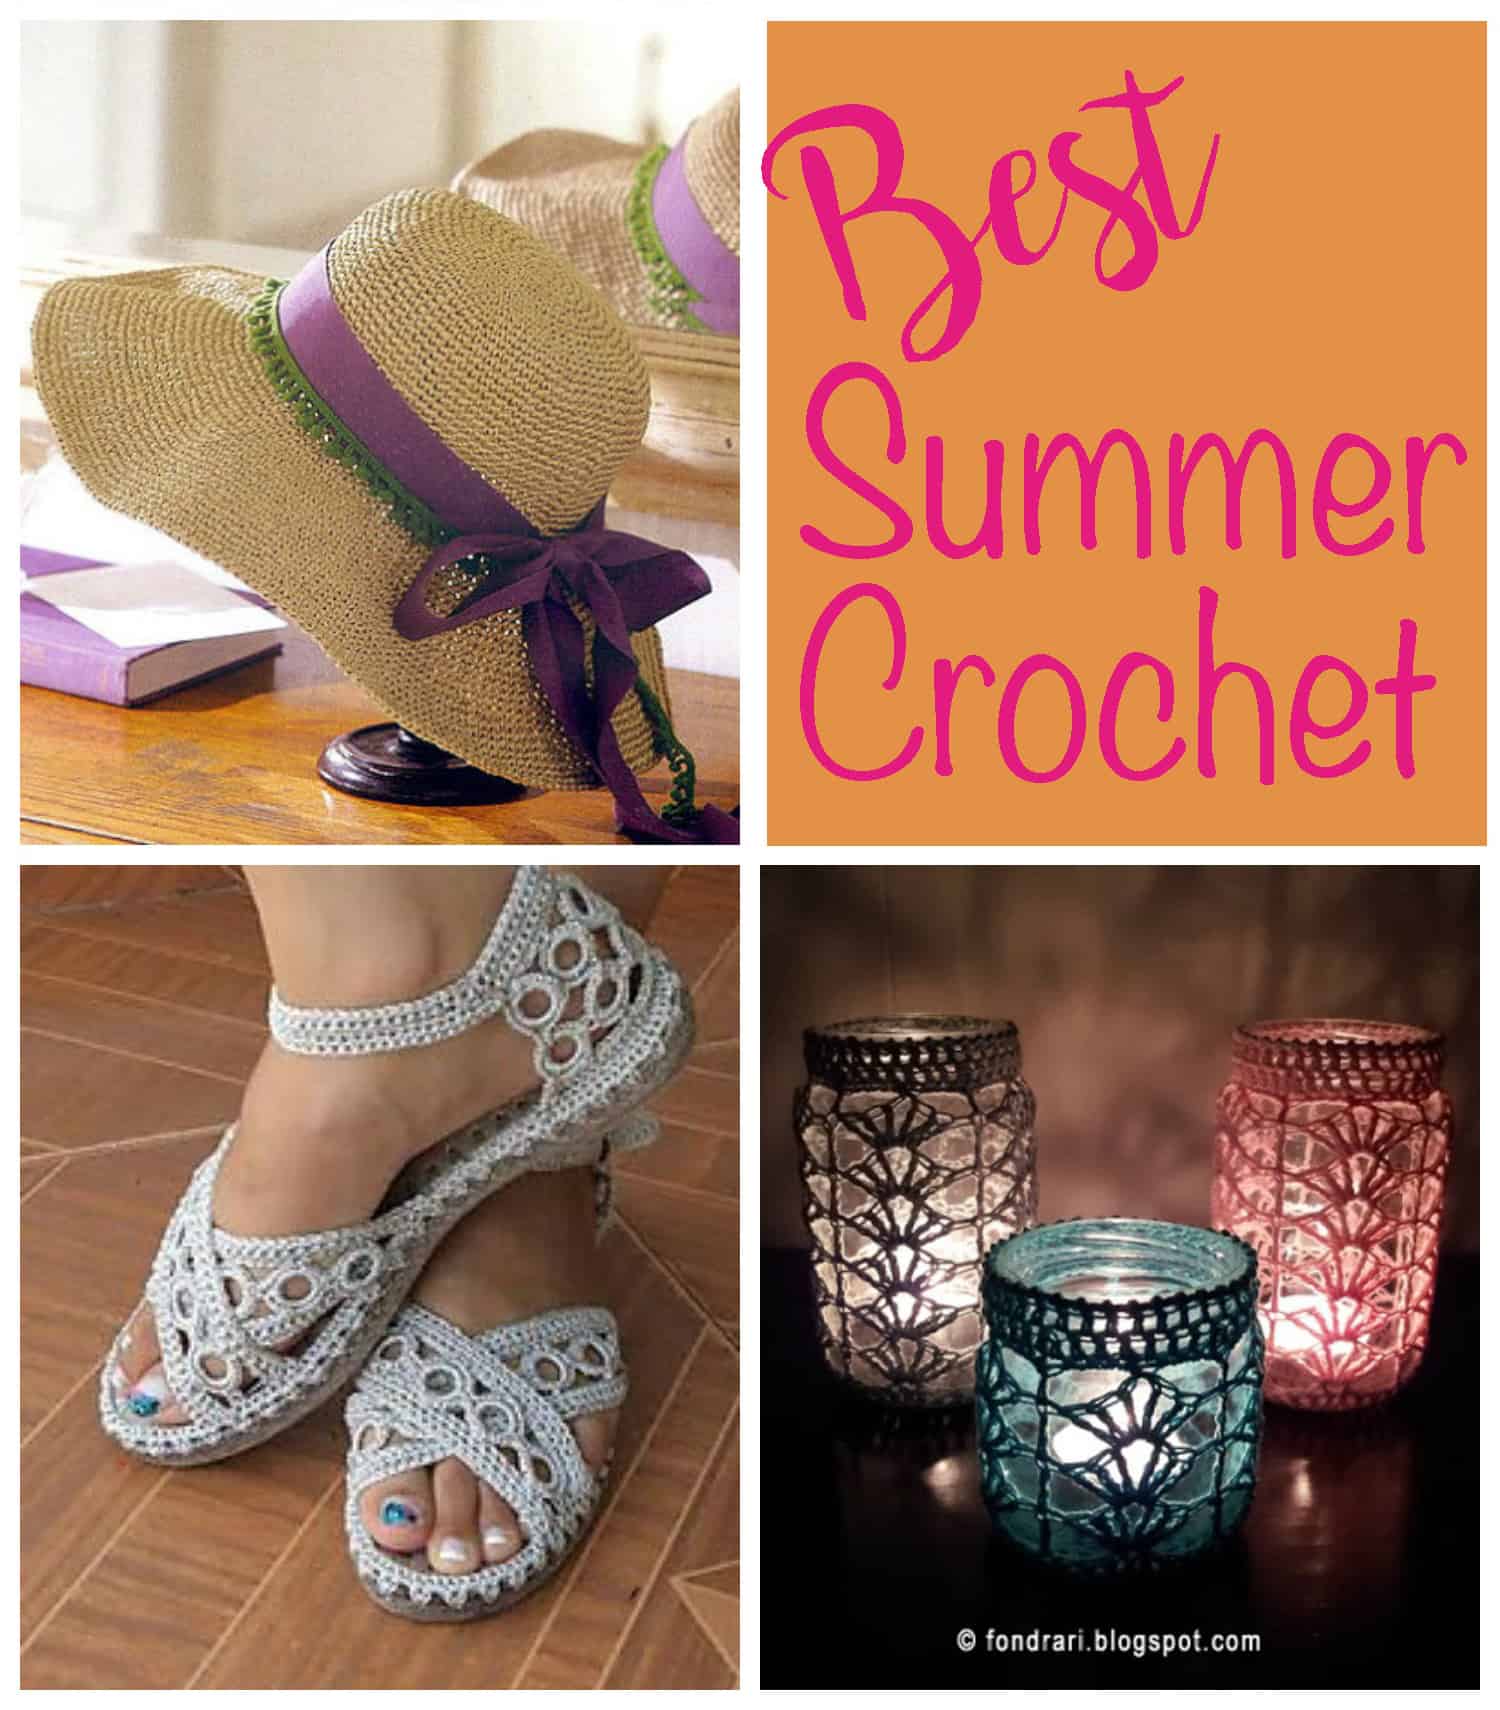 Graphic of summer crochet projects